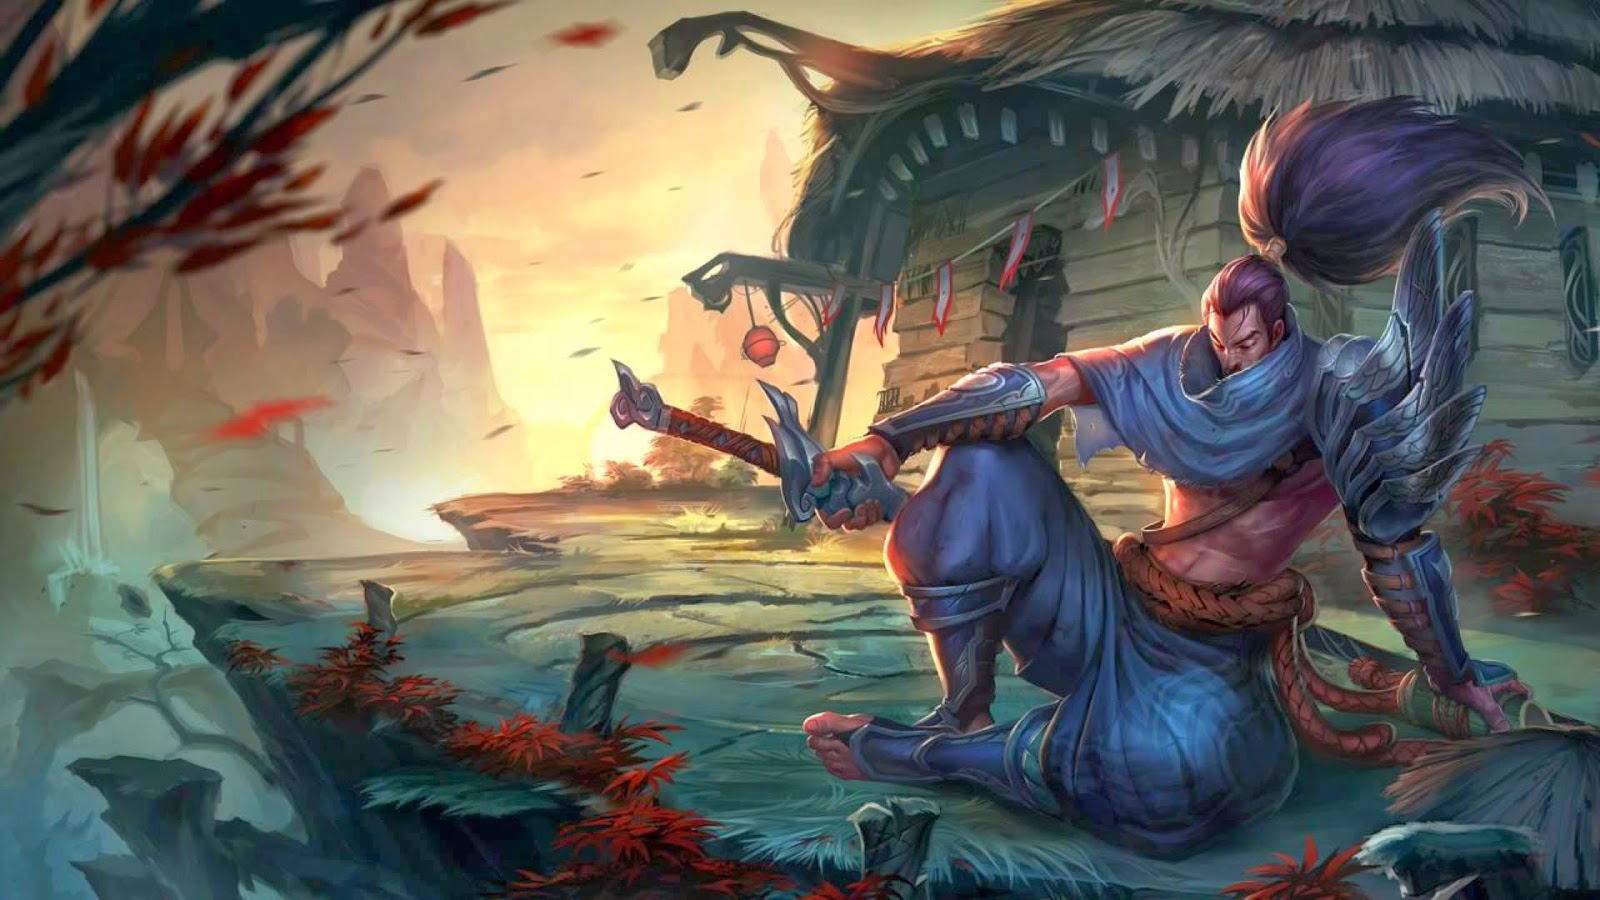 League Of Legends Wallpaper And Cover Photos Blog Yasuo League Of Legends Wallpaper Yasuo Desktop Wallpaper